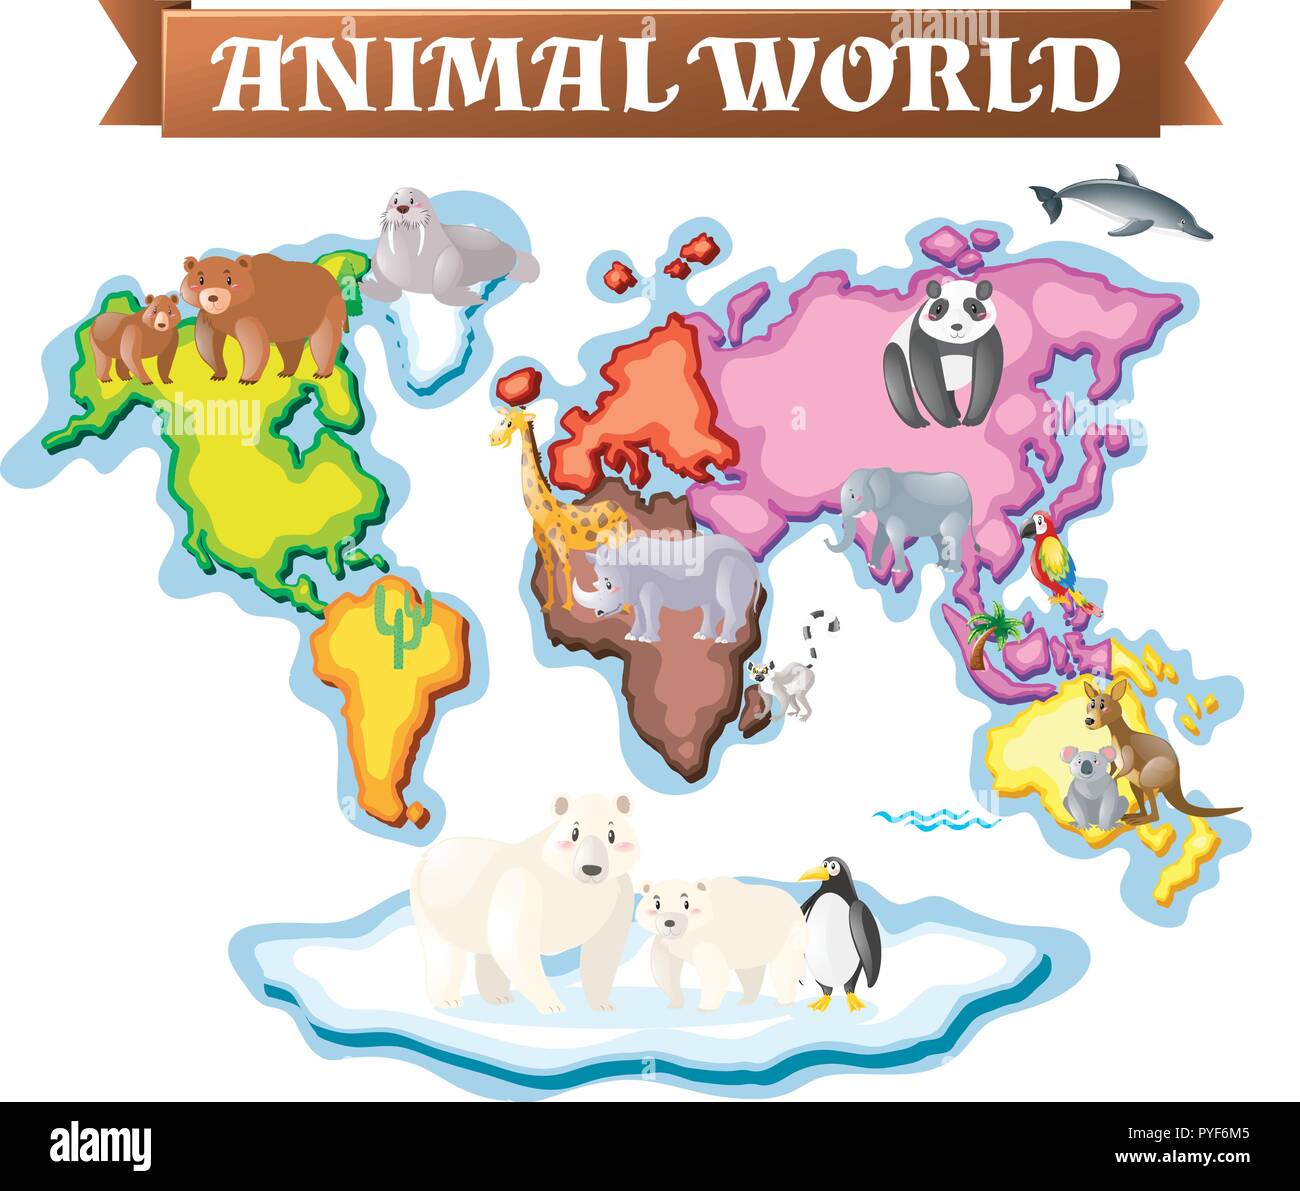 Animals in different parts of the world on map illustration Stock Vector